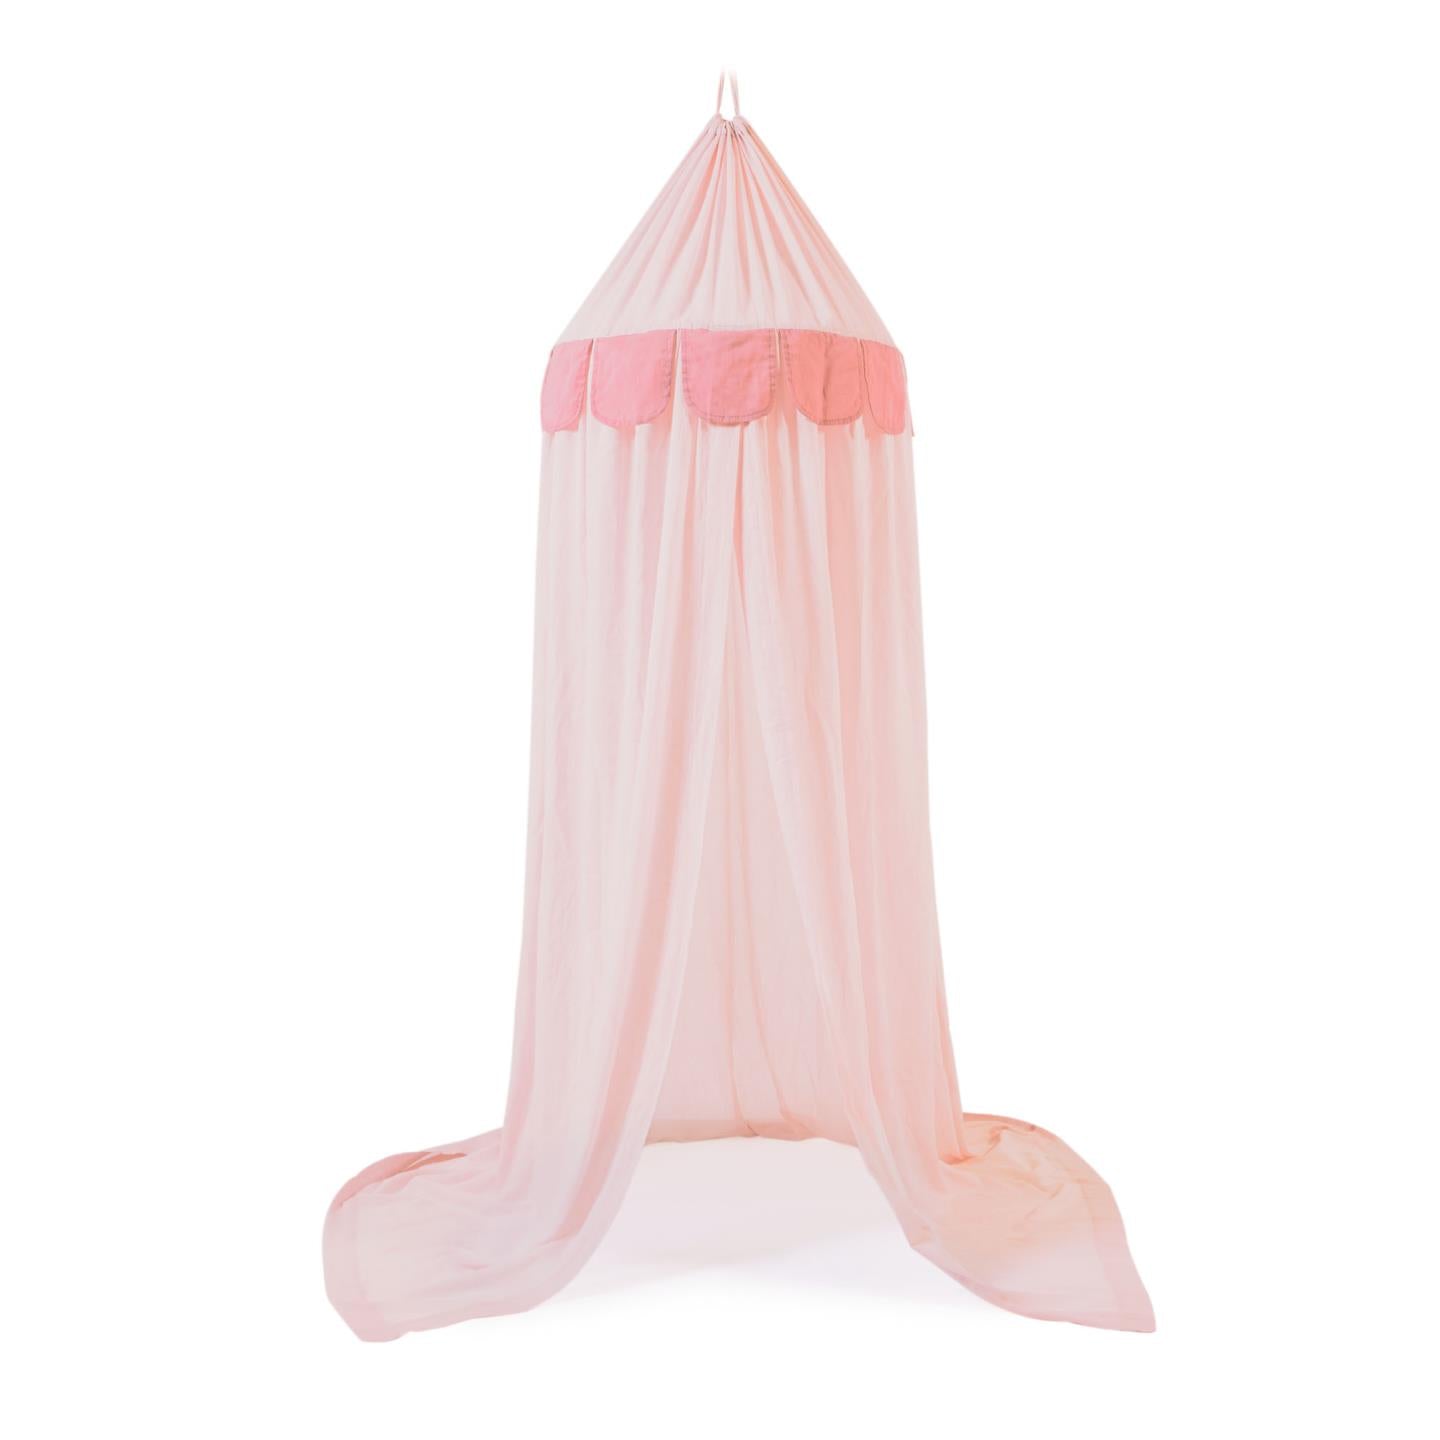 Carelene 100% cotton canopy for kids in pink